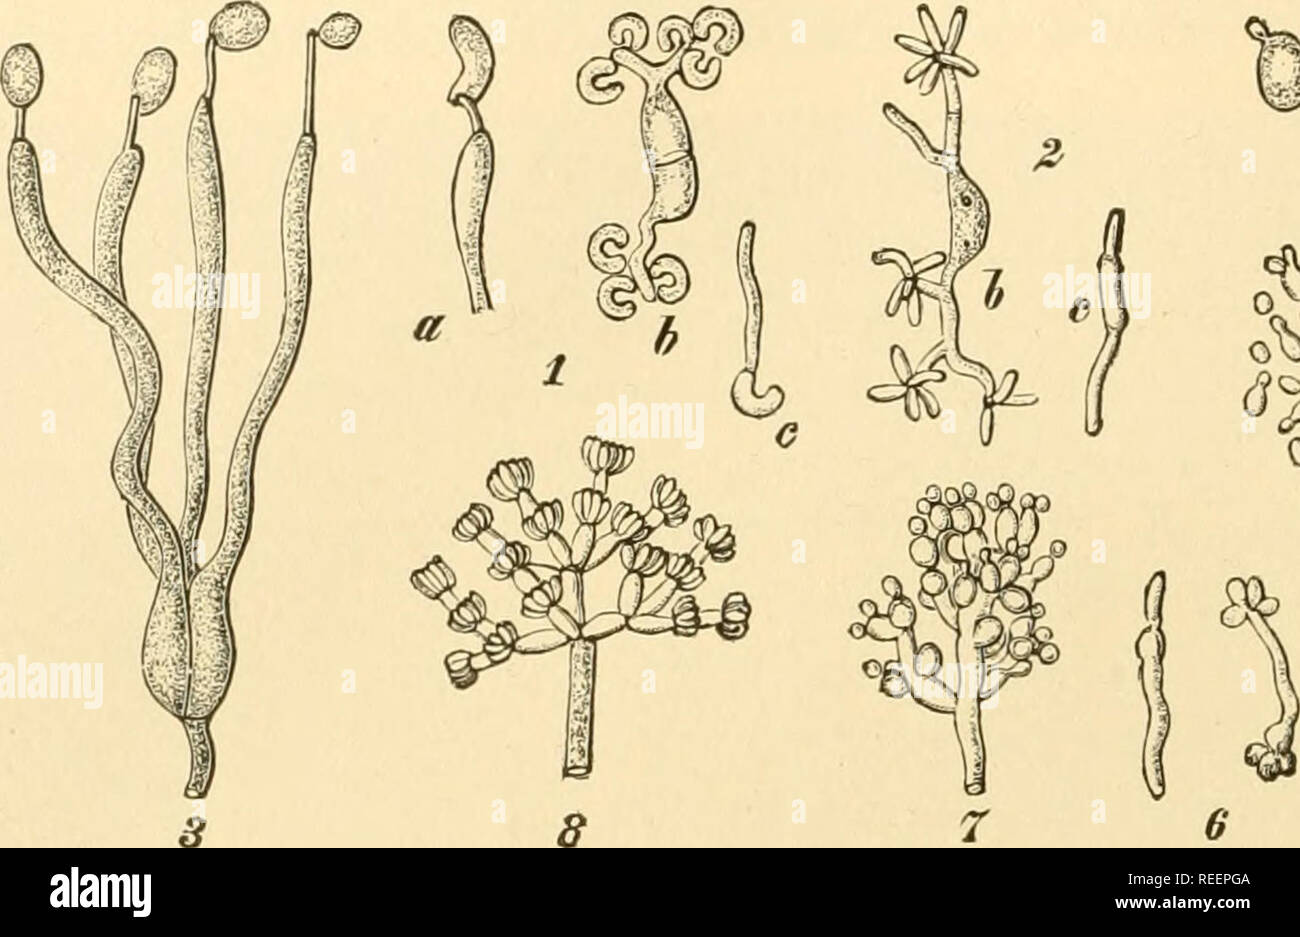 . Comparative morphology of Fungi. Fungi. 524 COMPARATIVE MORPHOLOGY OF FUNGI The germination of basidiospores has only been reported in the last three genera. A basidiospore of Exidia repanda divides into two daughter. d$*s* Fig. 344.—Exidia repanda. 1. a, tip of mature sterigma with reniform basidiospore; b, germination of basidiospore with falcate conidia. 2. Exidia saccharina, var. foliacea. (Ulocolla foliacea). b, germinating basidiospore; c, germinating conidia. Tremella lutes- cens. 3. Mature basidium. 4. Germinating basidiospores, one surrounded by sprout cells. 5. Sprout mycelium. 6.  Stock Photo